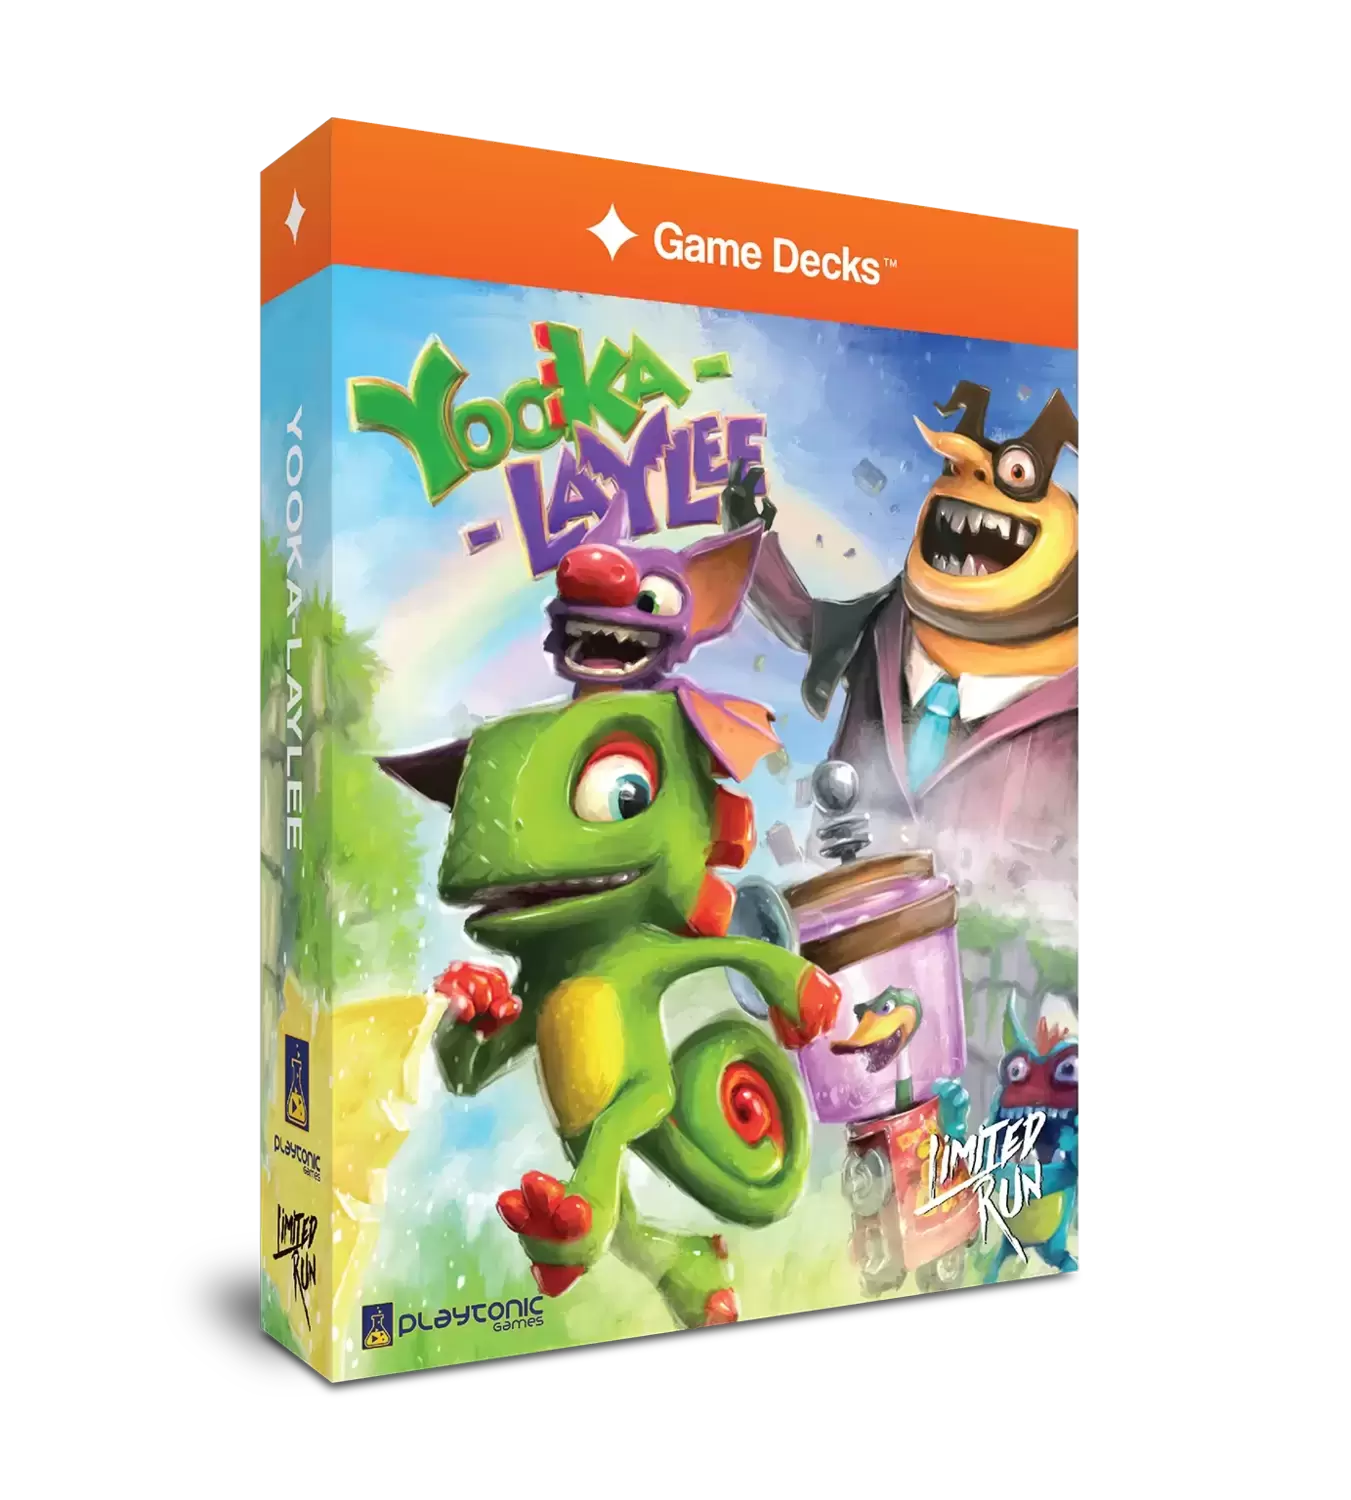 Others Boardgames - Game Deck - Yooka-Laylee Limited run Game